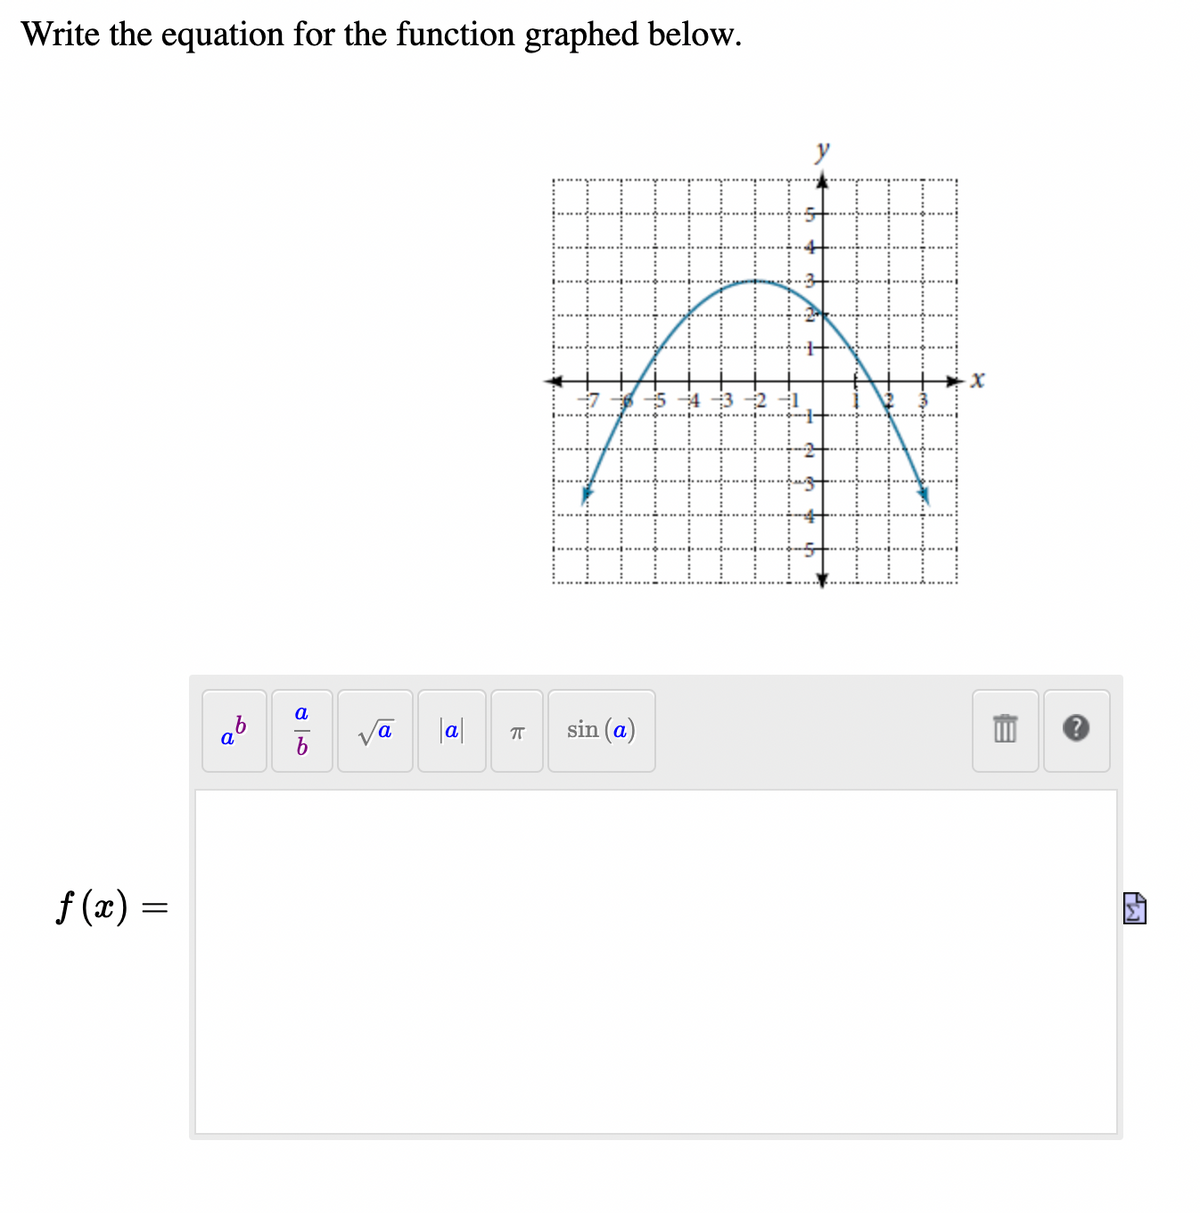 Write the equation for the function graphed below.
*5 4 3 -2
a
ab
b
|a|
sin (a)
f (x) :
